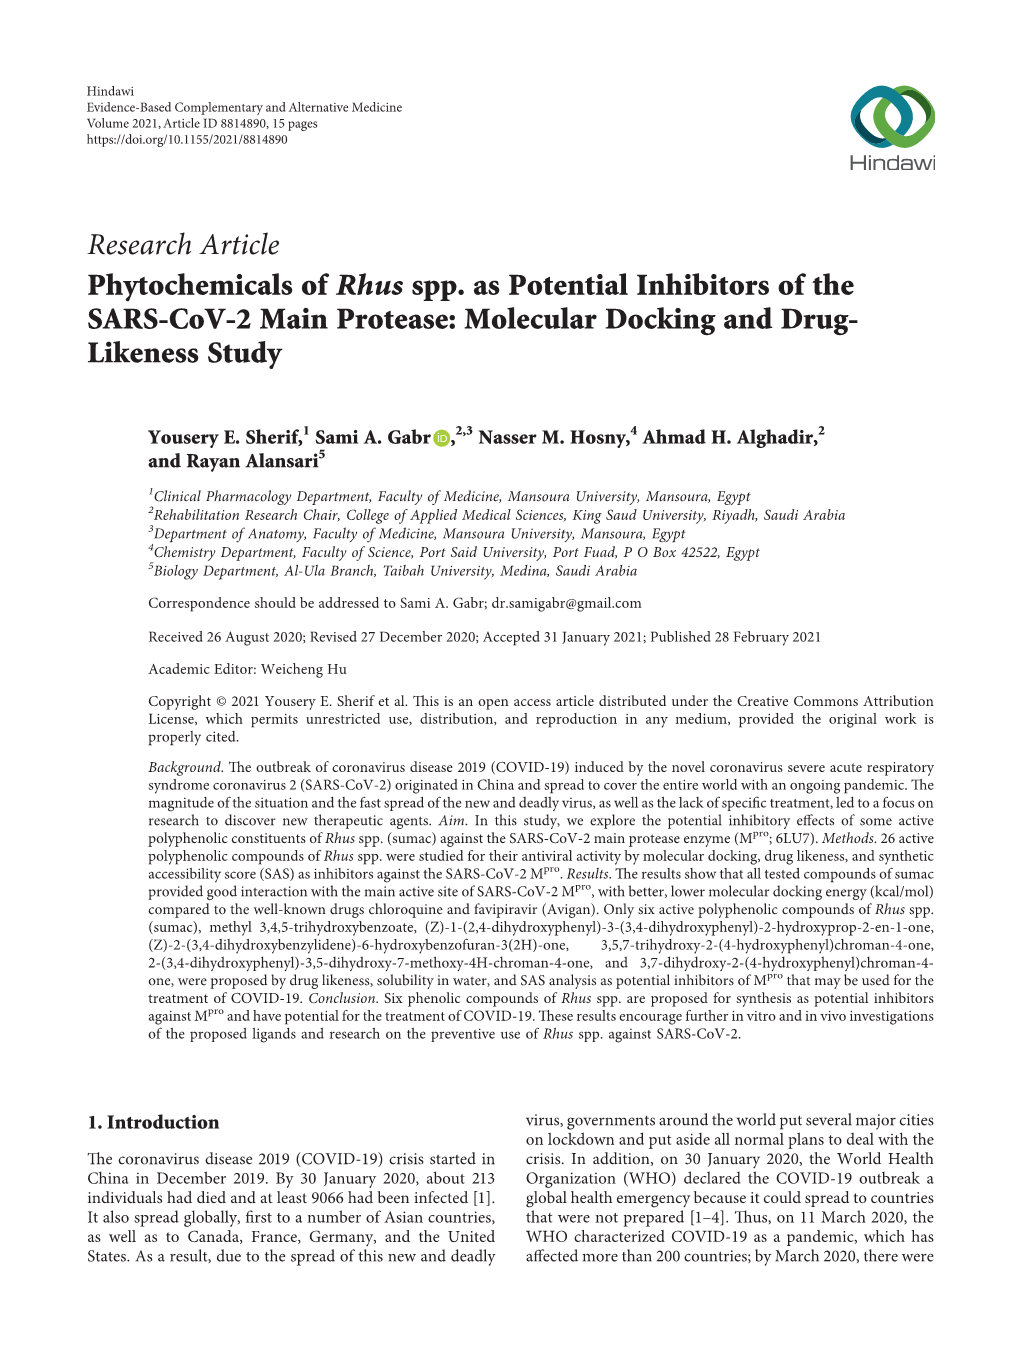 Research Article Phytochemicals of Rhus Spp. As Potential Inhibitors of the SARS-Cov-2 Main Protease: Molecular Docking and Drug- Likeness Study